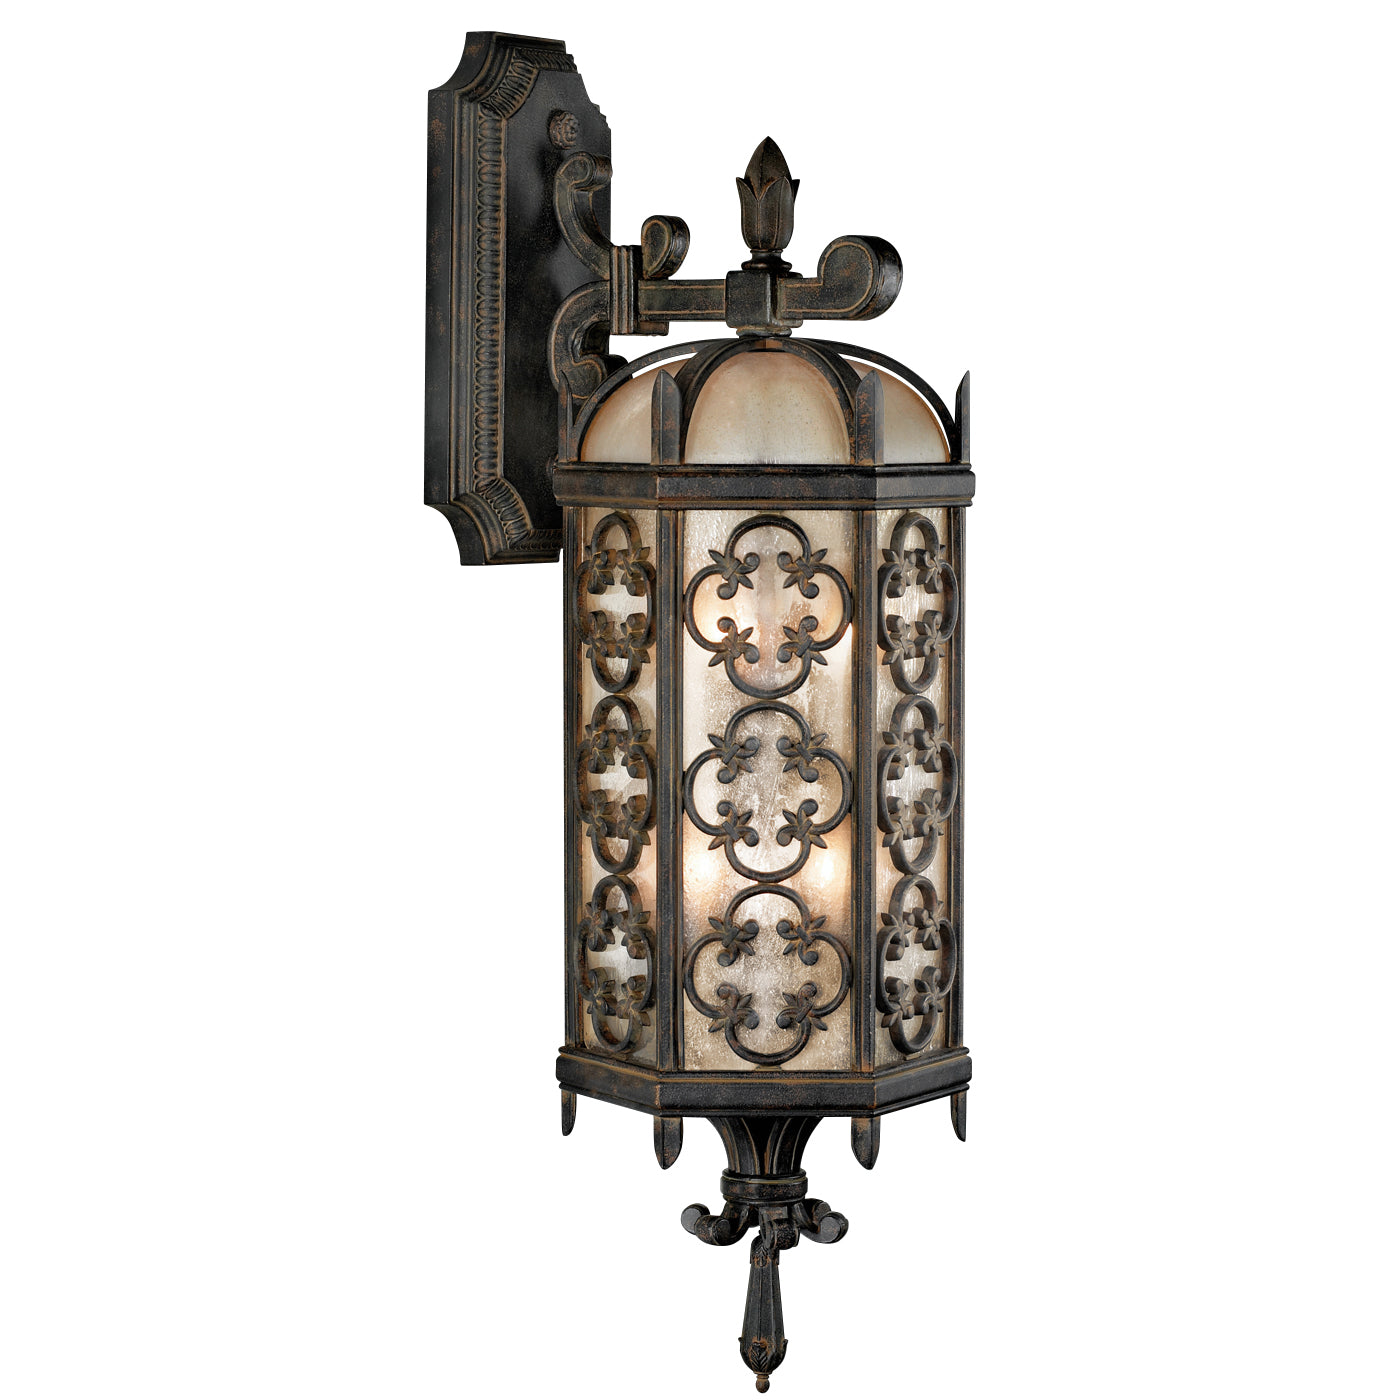 Fine Art Costa del Sol Outdoor Wall Mount Outdoor l Wall Fine Art Handcrafted Lighting Wrought Iron 8Wx27H 